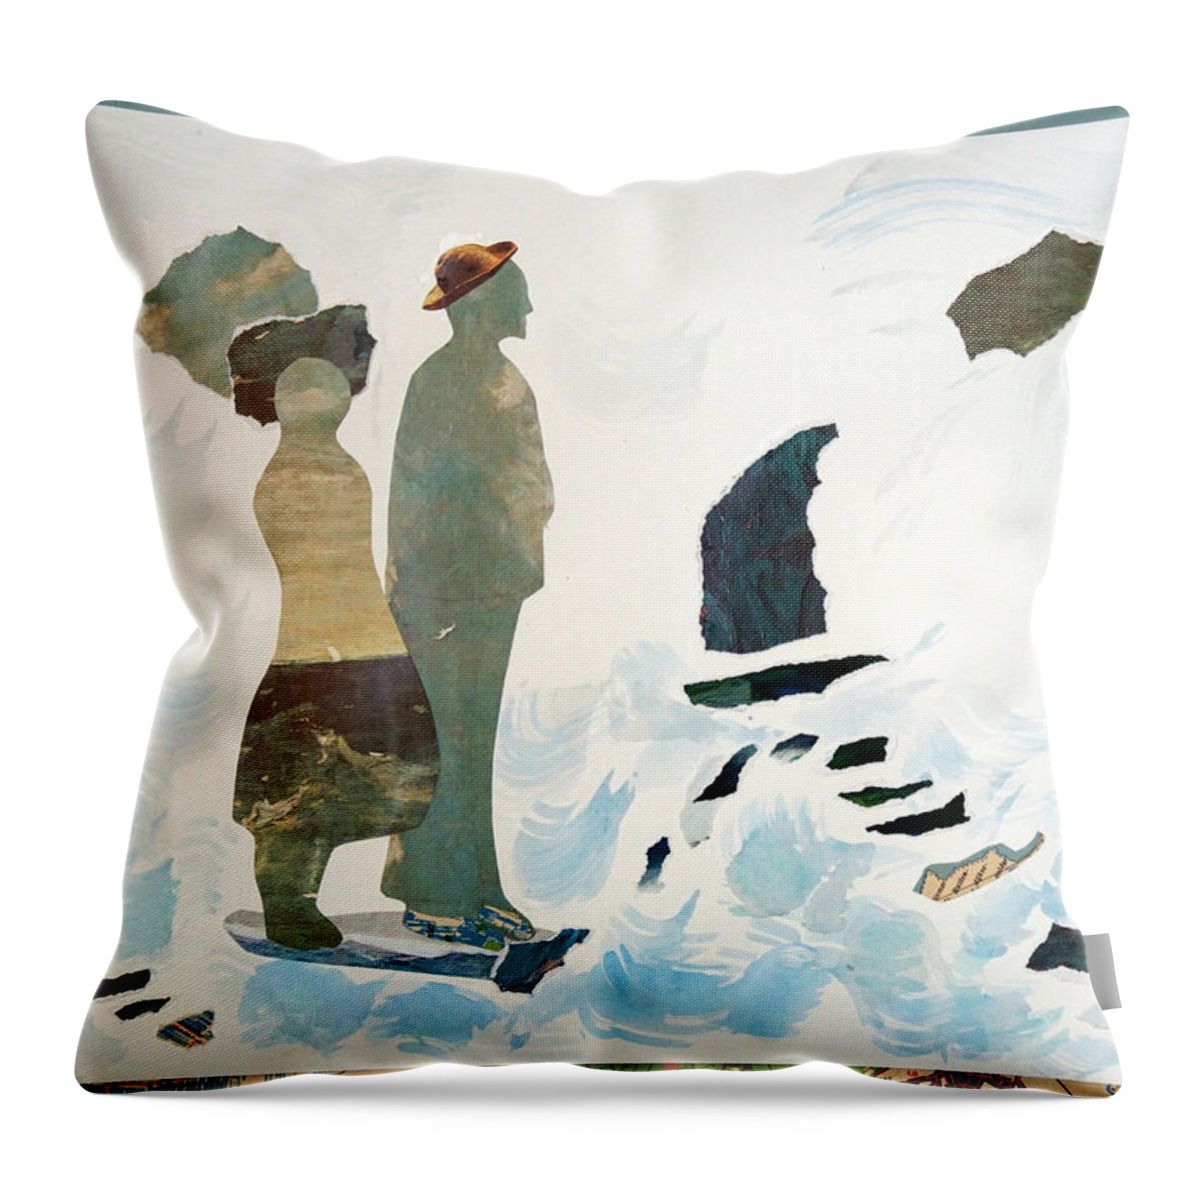 Sea Throw Pillow featuring the mixed media Where are we going? by Jolly Van der Velden